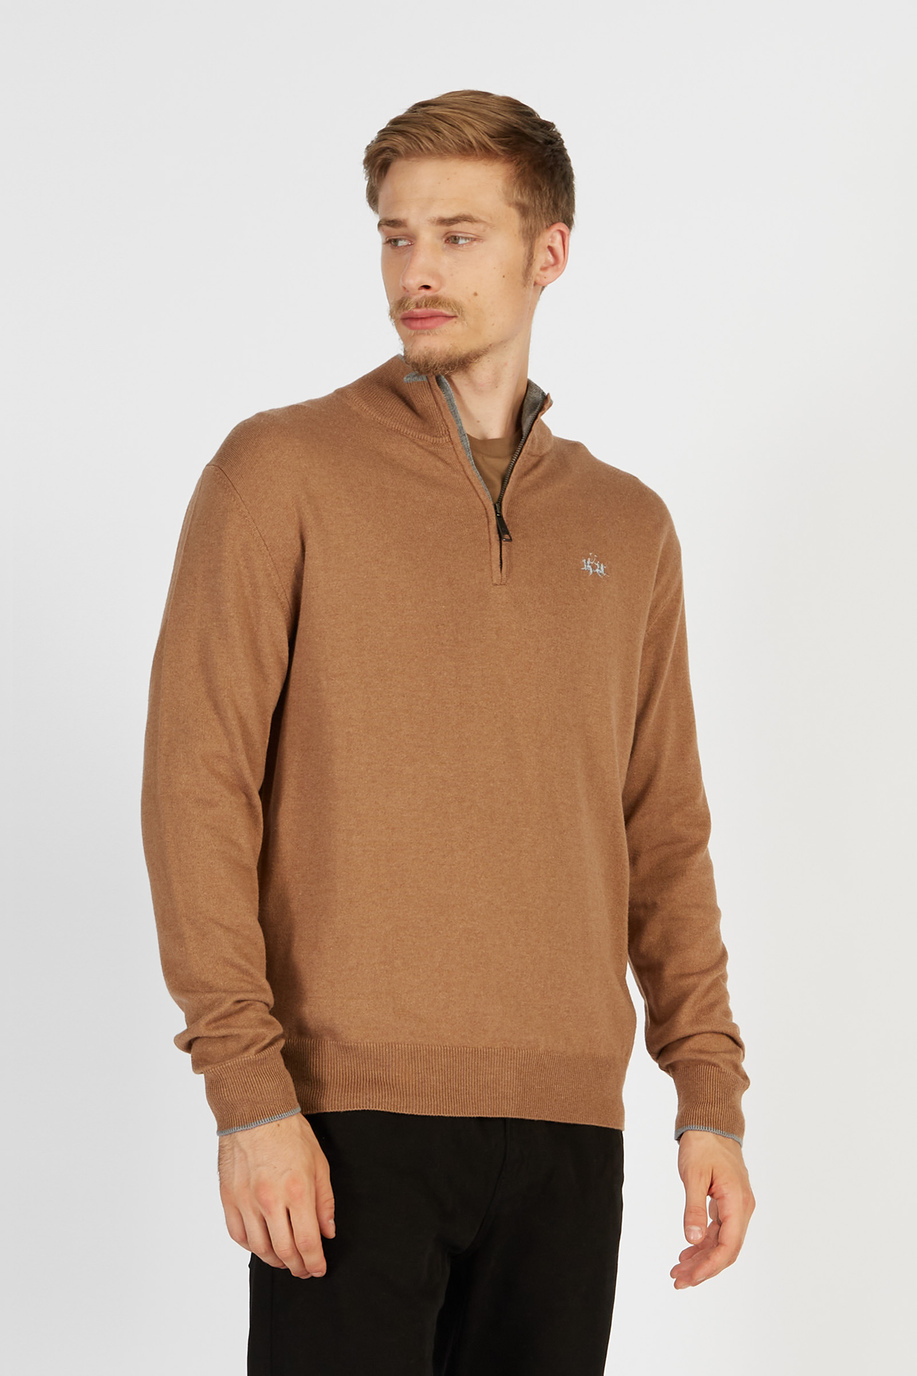 Men’s knitted sweater with long sleeves in cotton and regular fit wool blend with zip neckline - Knitwear | La Martina - Official Online Shop